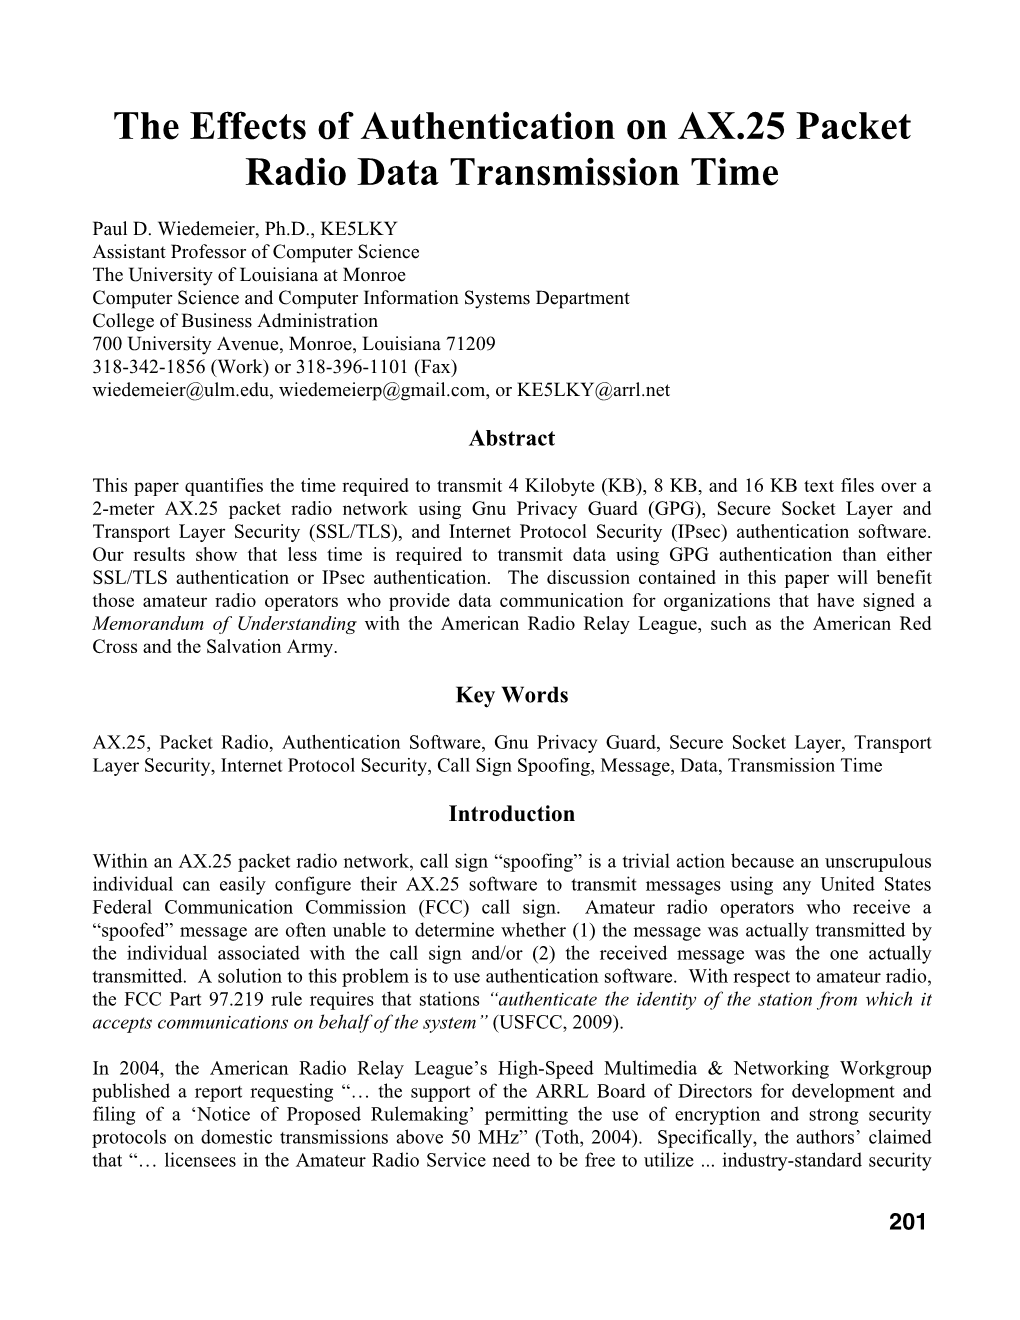 The Effects of Authentication on AX.25 Packet Radio Data Transmission Time